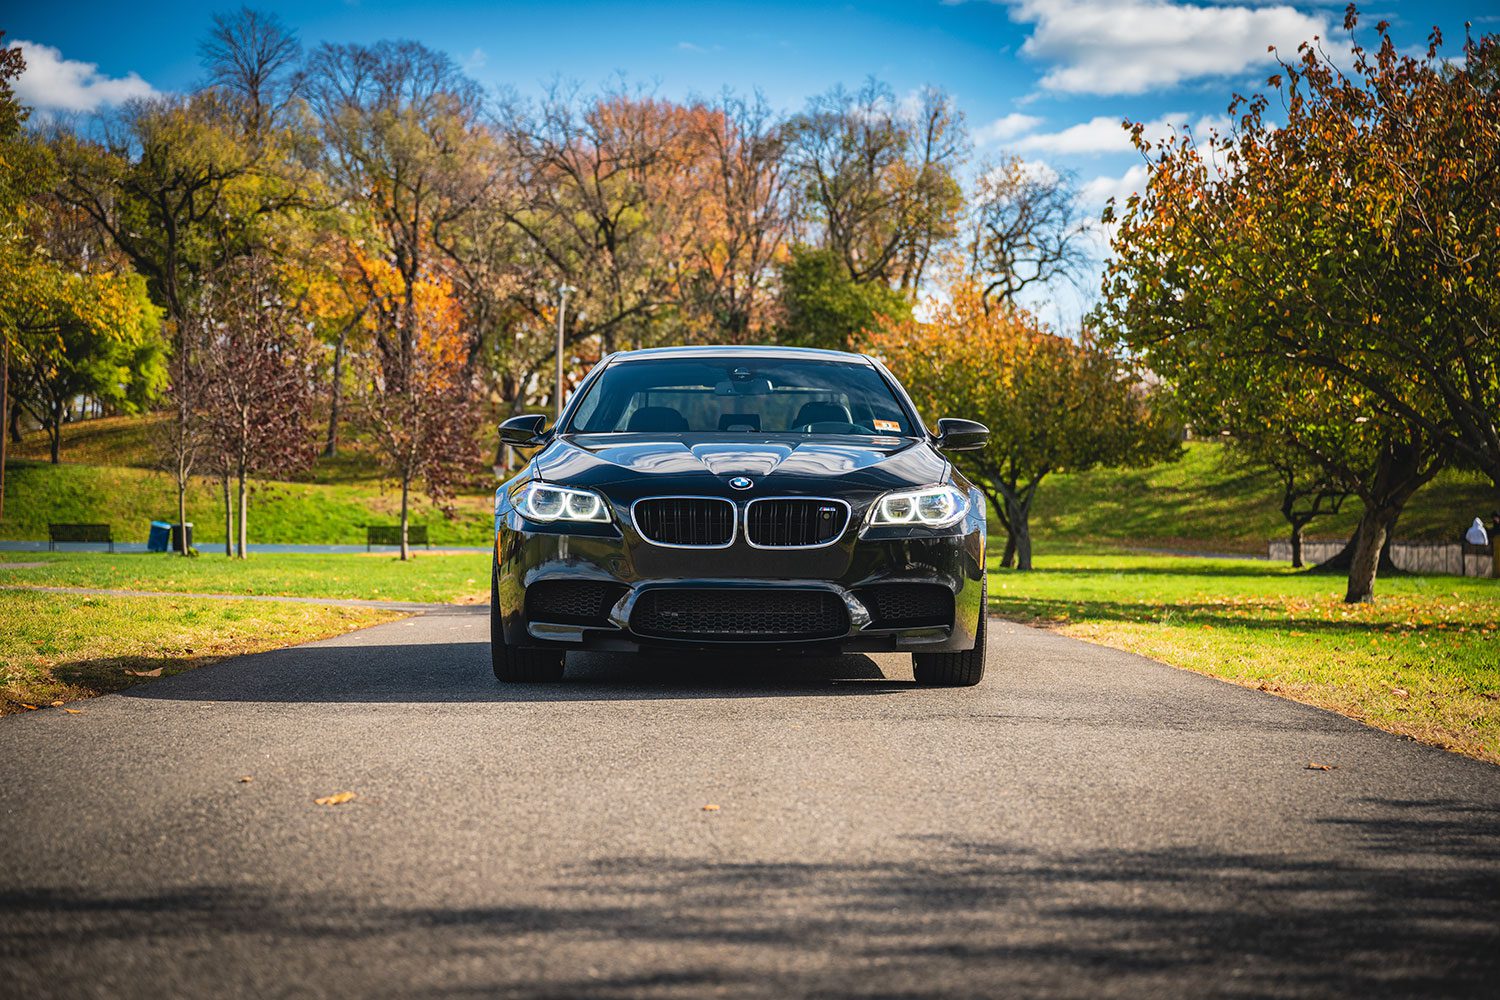 The Bmw F10 M5 Is The Forgotten M Car | Machines With Souls